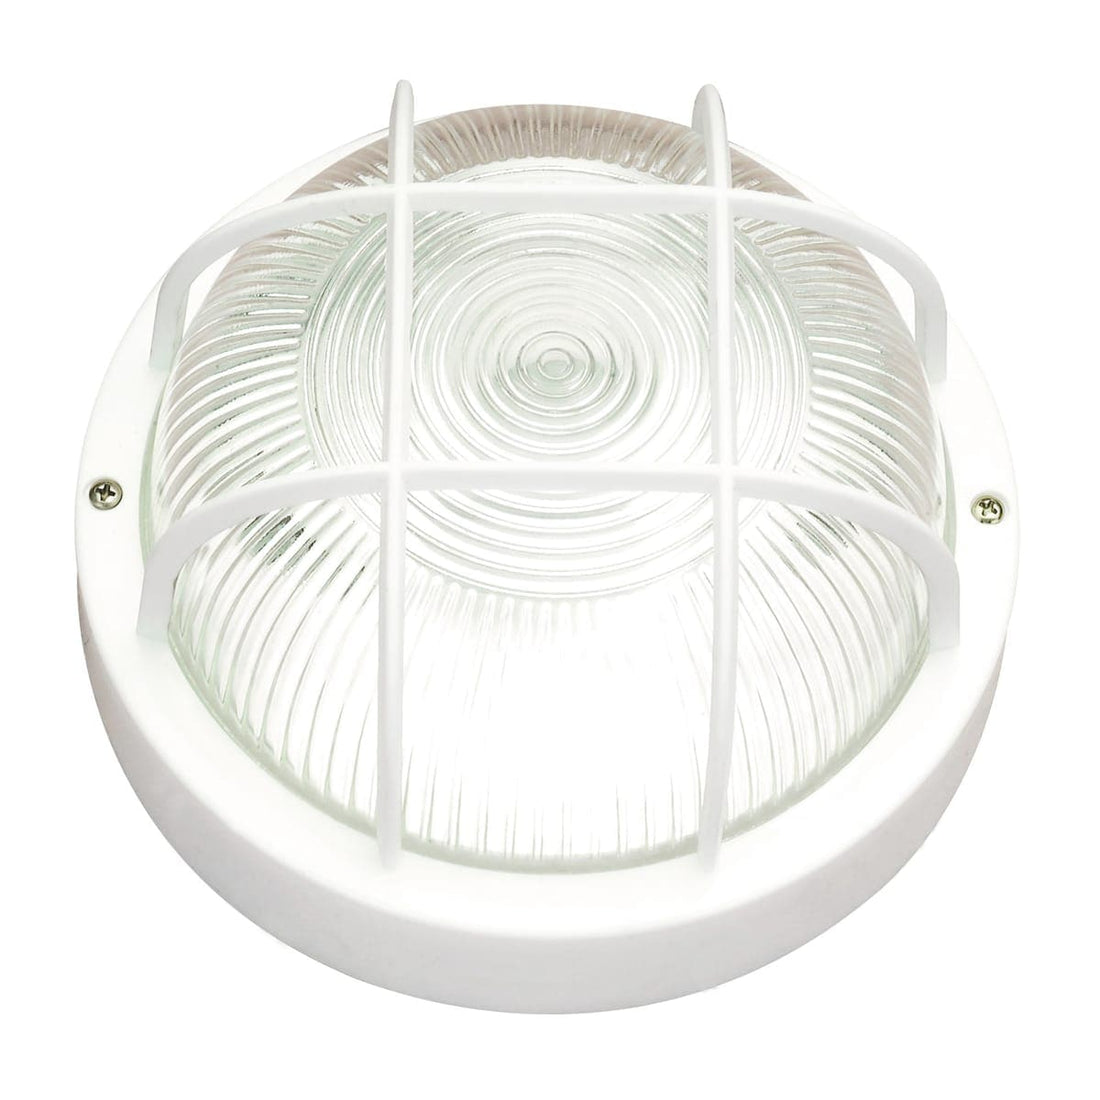 ROUND CEILING LIGHT WITH PLASTIC CAGE WHITE D18.5 E27=60W IP44 - best price from Maltashopper.com BR420002812